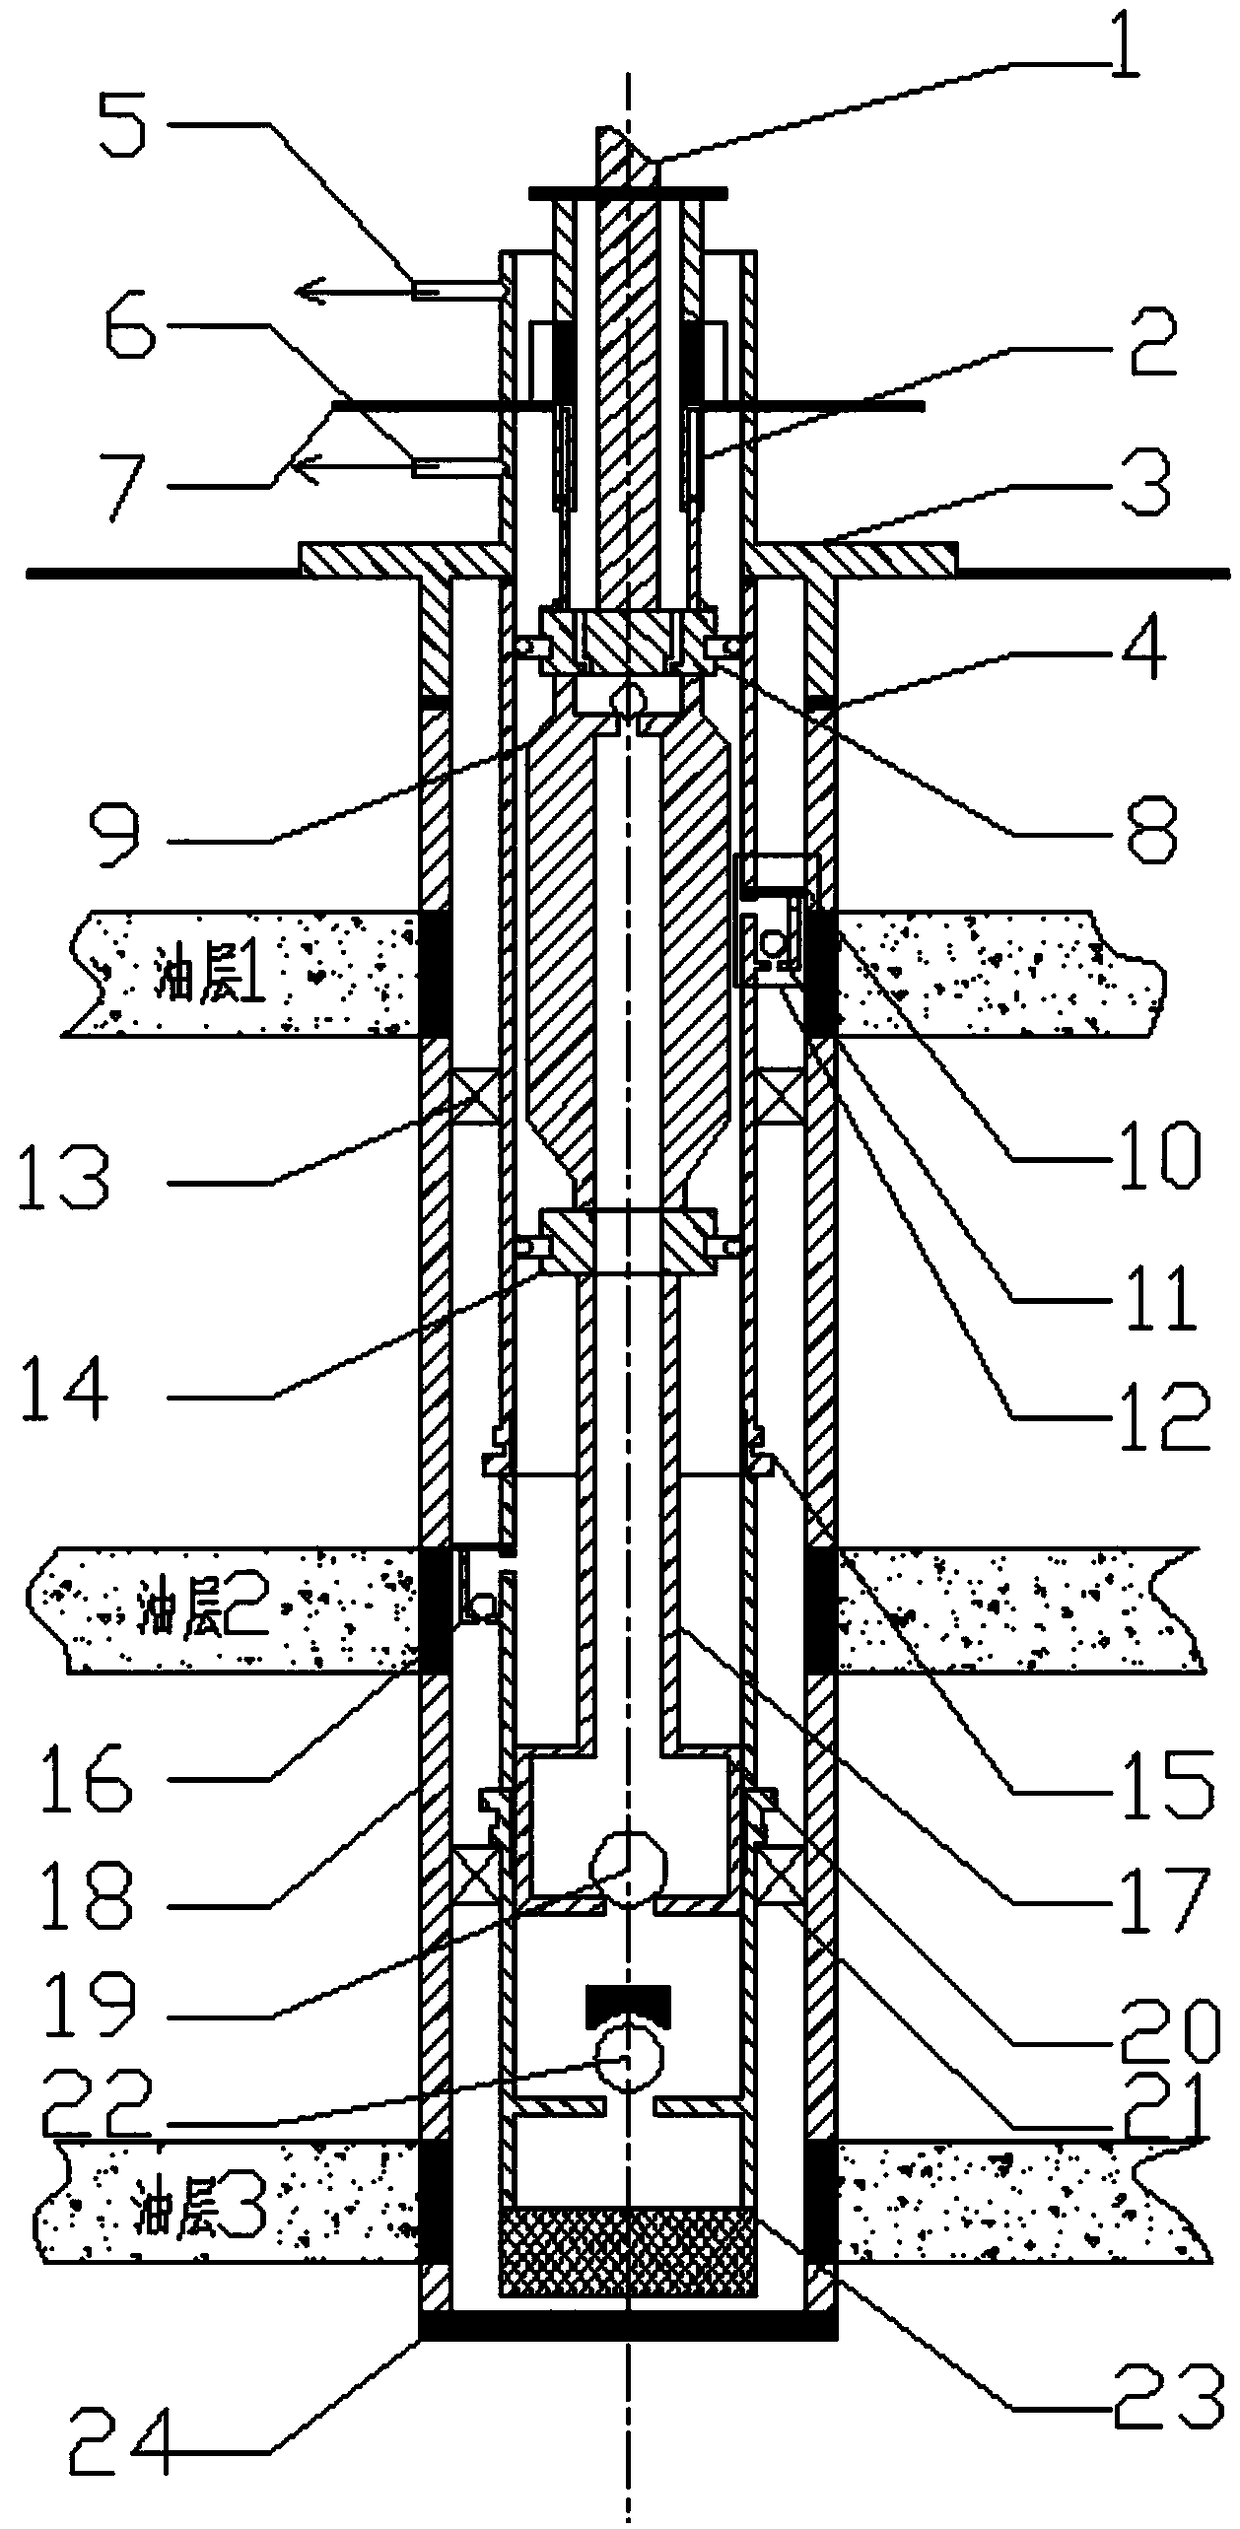 A production structure for multi-reservoir commingled production